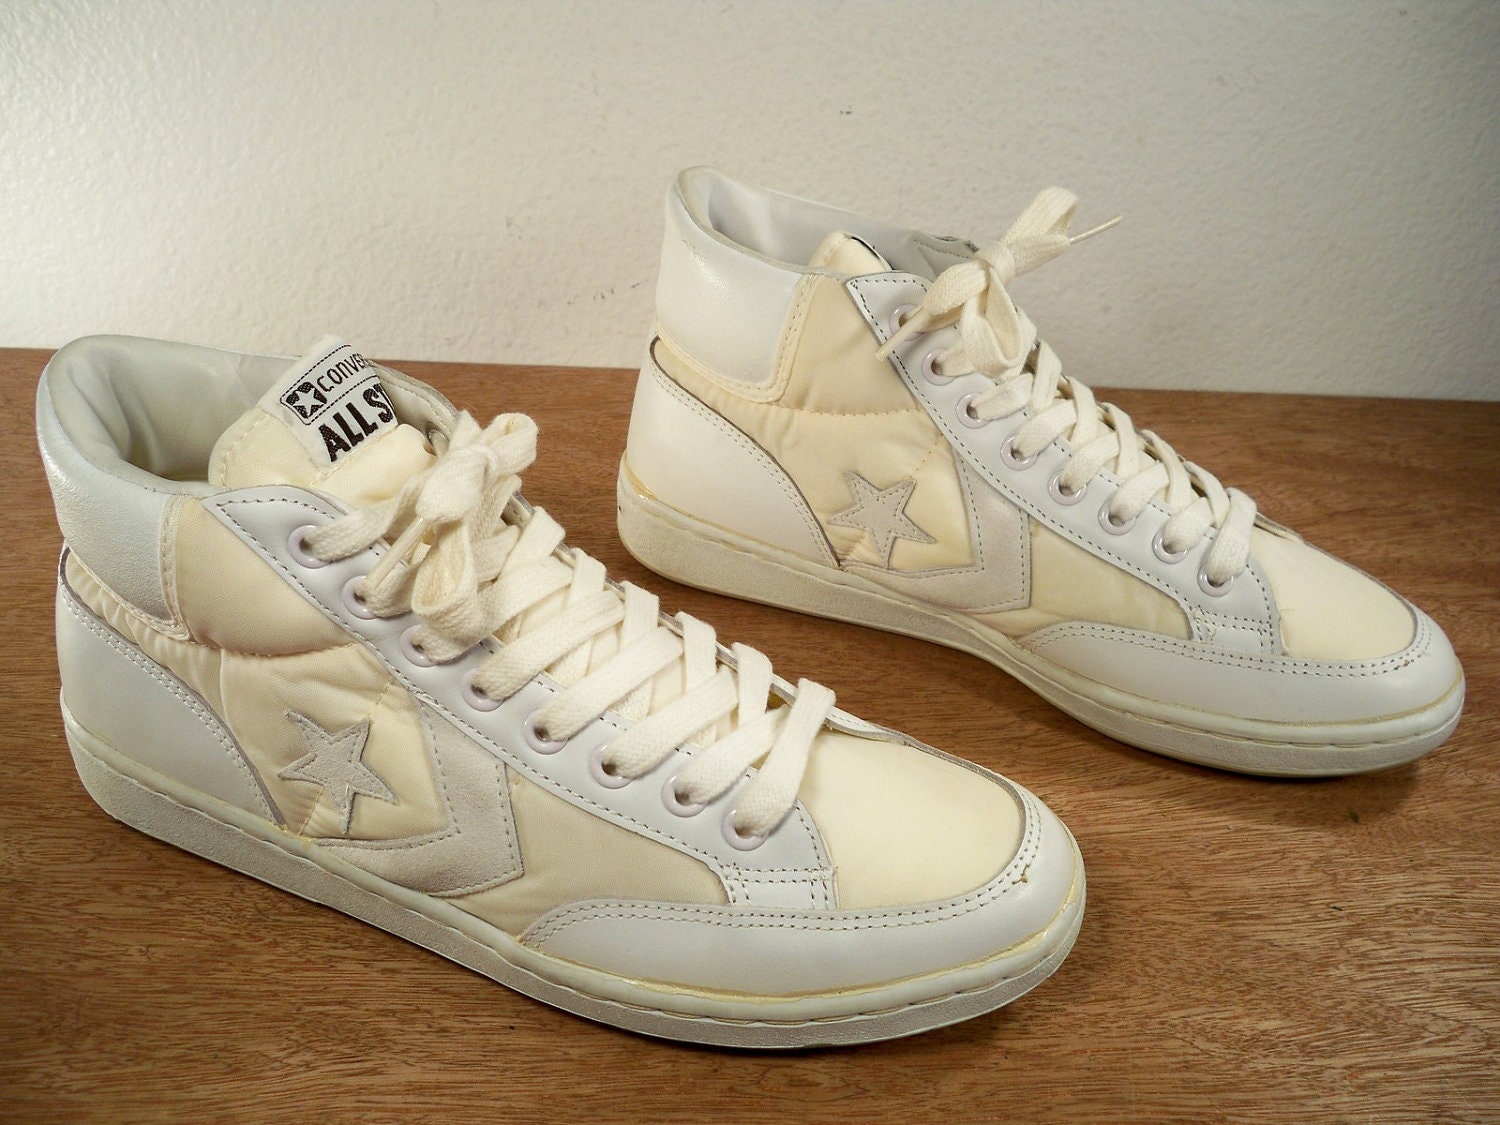 Vintage CONVERSE ALL STAR High Top Basketball White Leather